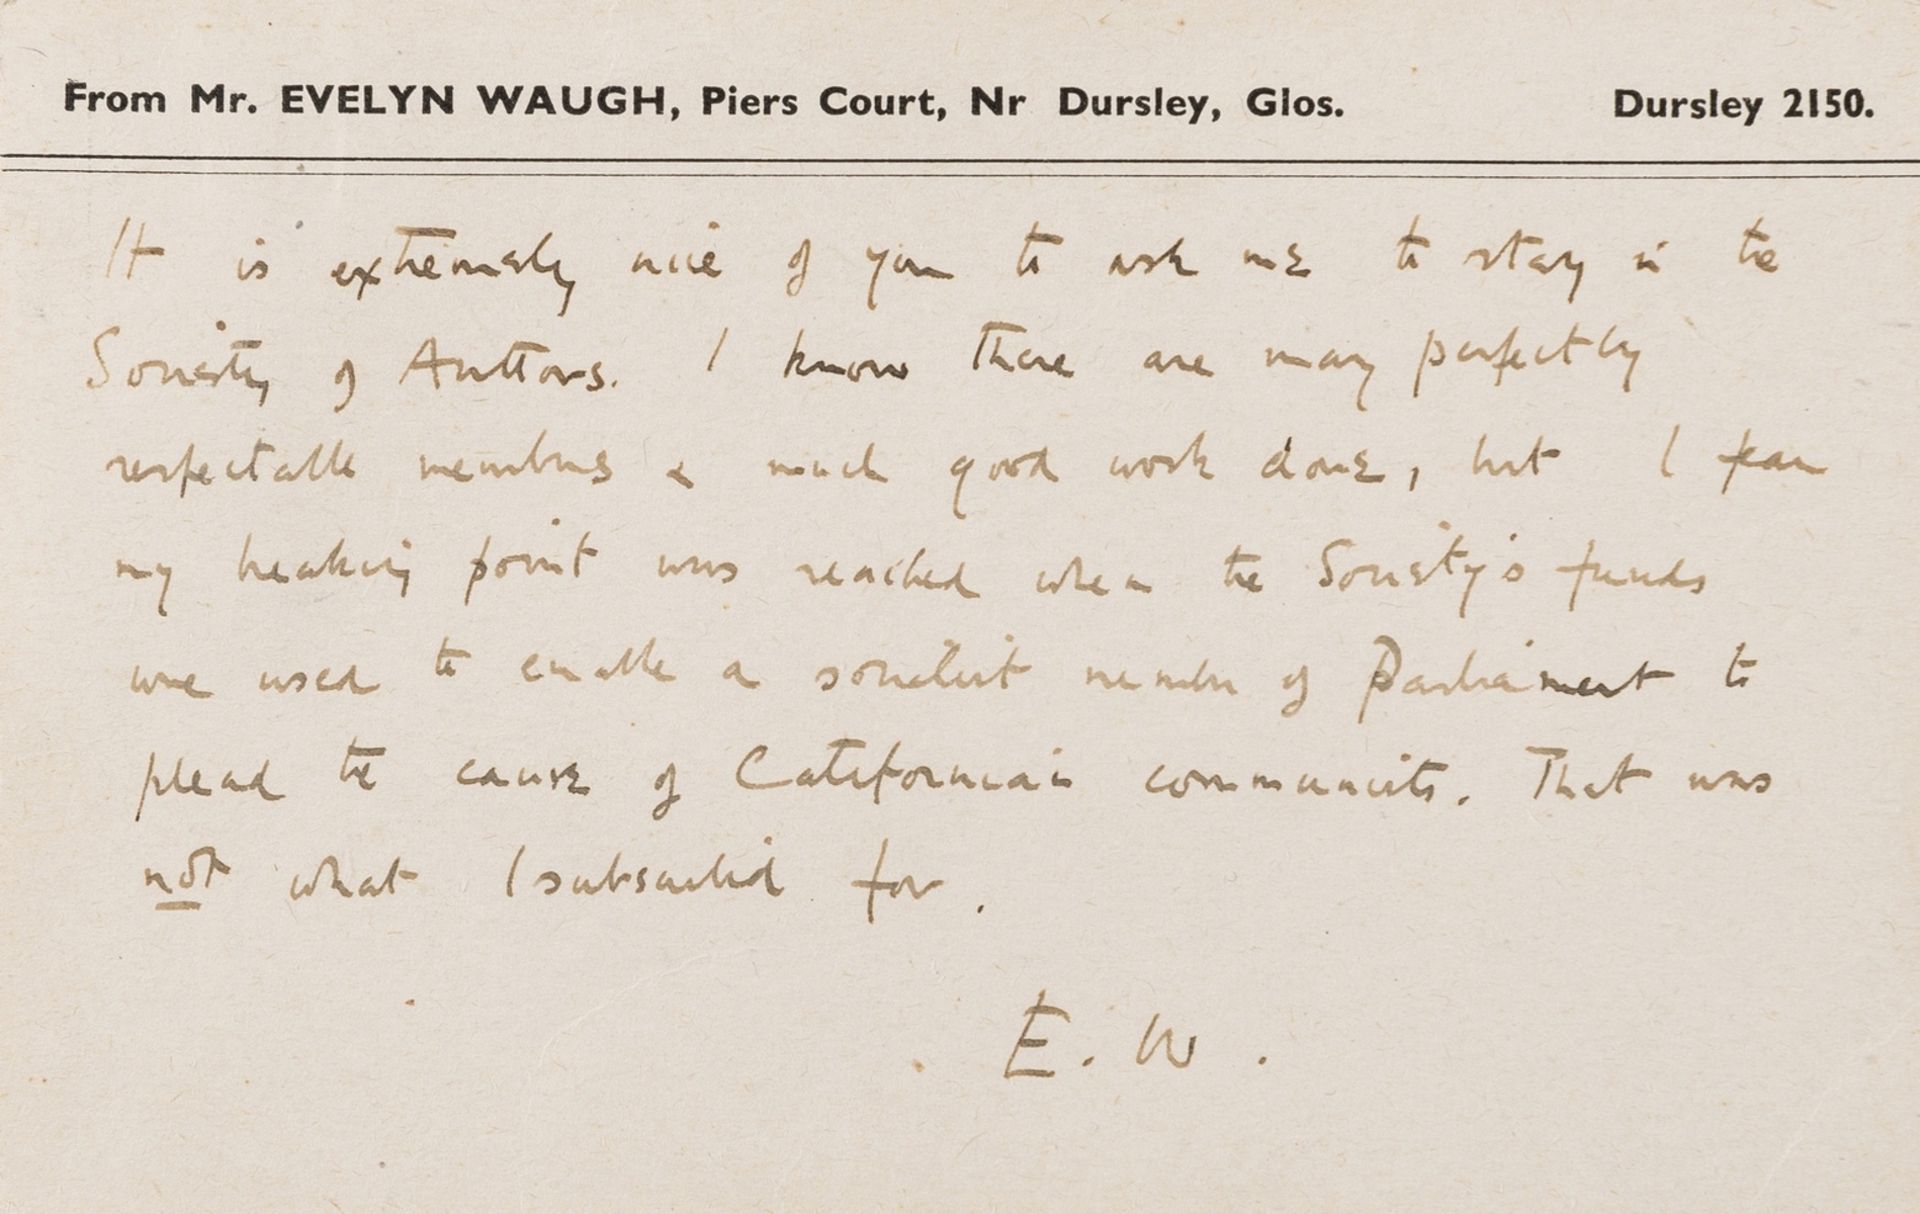 Waugh (Evelyn) 2 Autograph Postcards, resigning from the Society of Authors, 1950. - Image 2 of 2